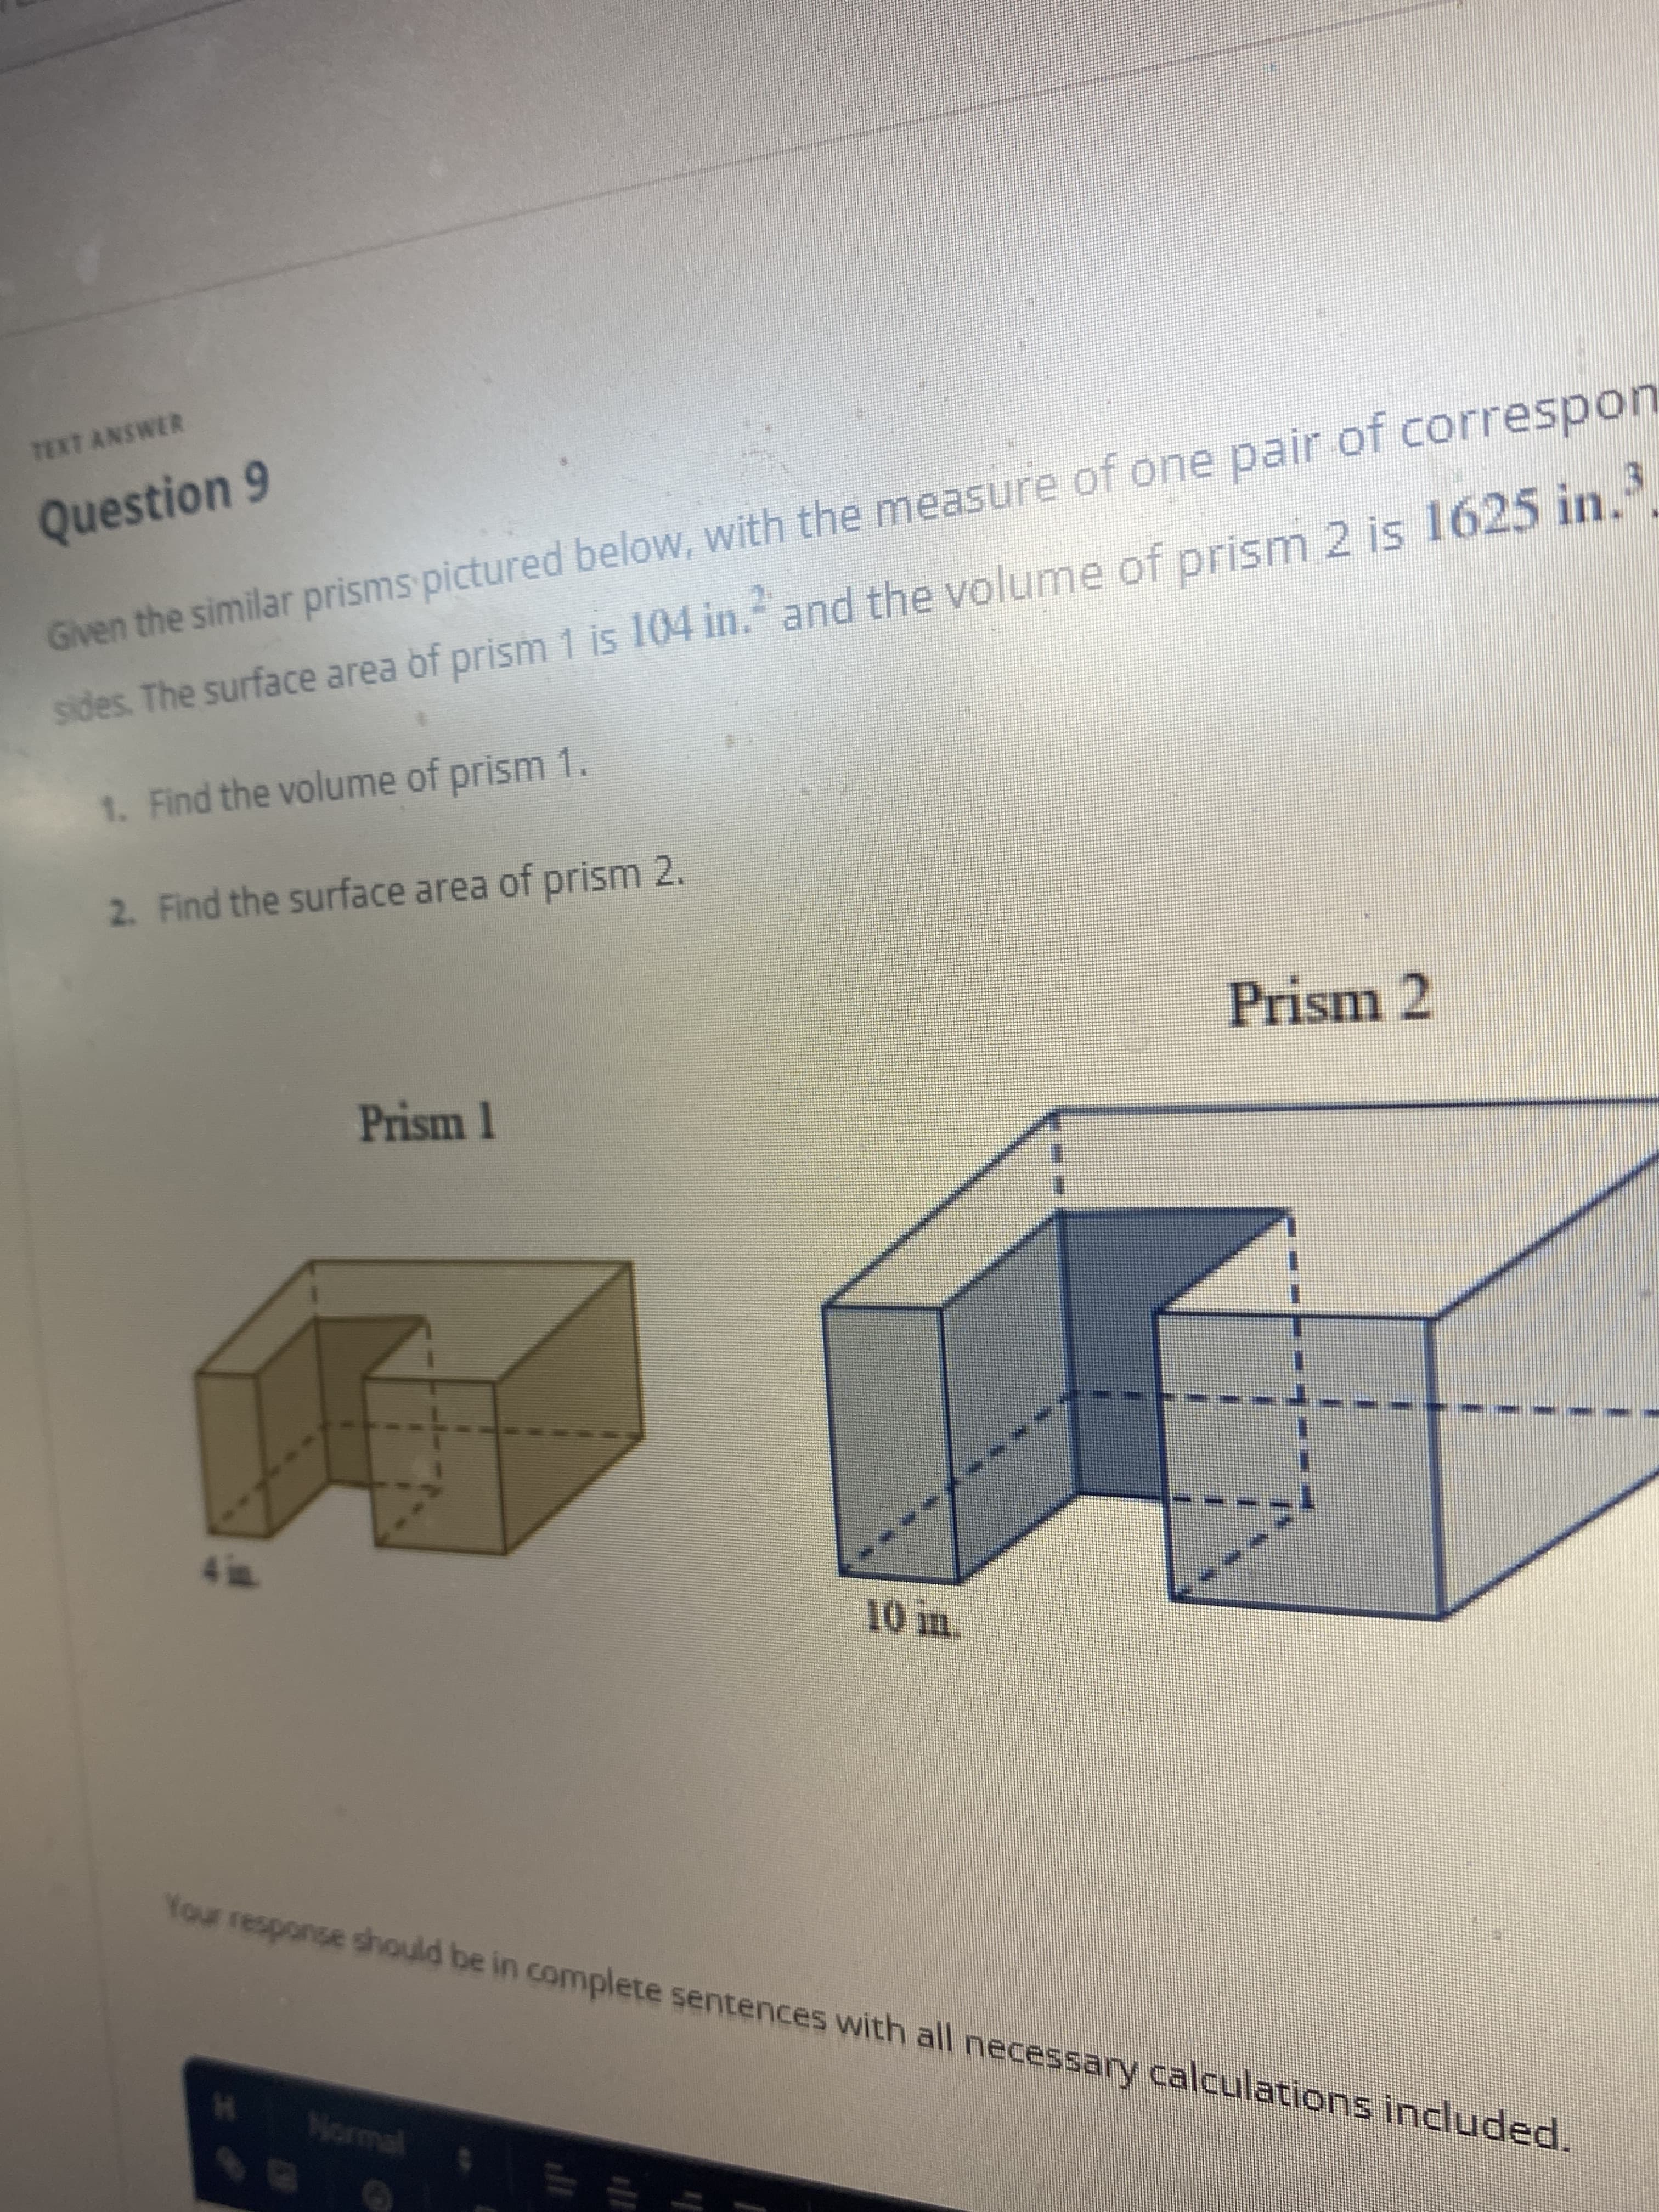 TEXT ANSWER
Question 9
Given the similar prisms pictured below, with the measure of one pair of correspon
sides. The surface area of prism 1 is 104 in." and the volume of prism 2 is 1625 in..
1. Find the volume of prism 1.
2. Find the surface area of prism 2.
Prism 2
Prism 1
Your response should be in complete sentences with all necessary calculations included.
Normal
